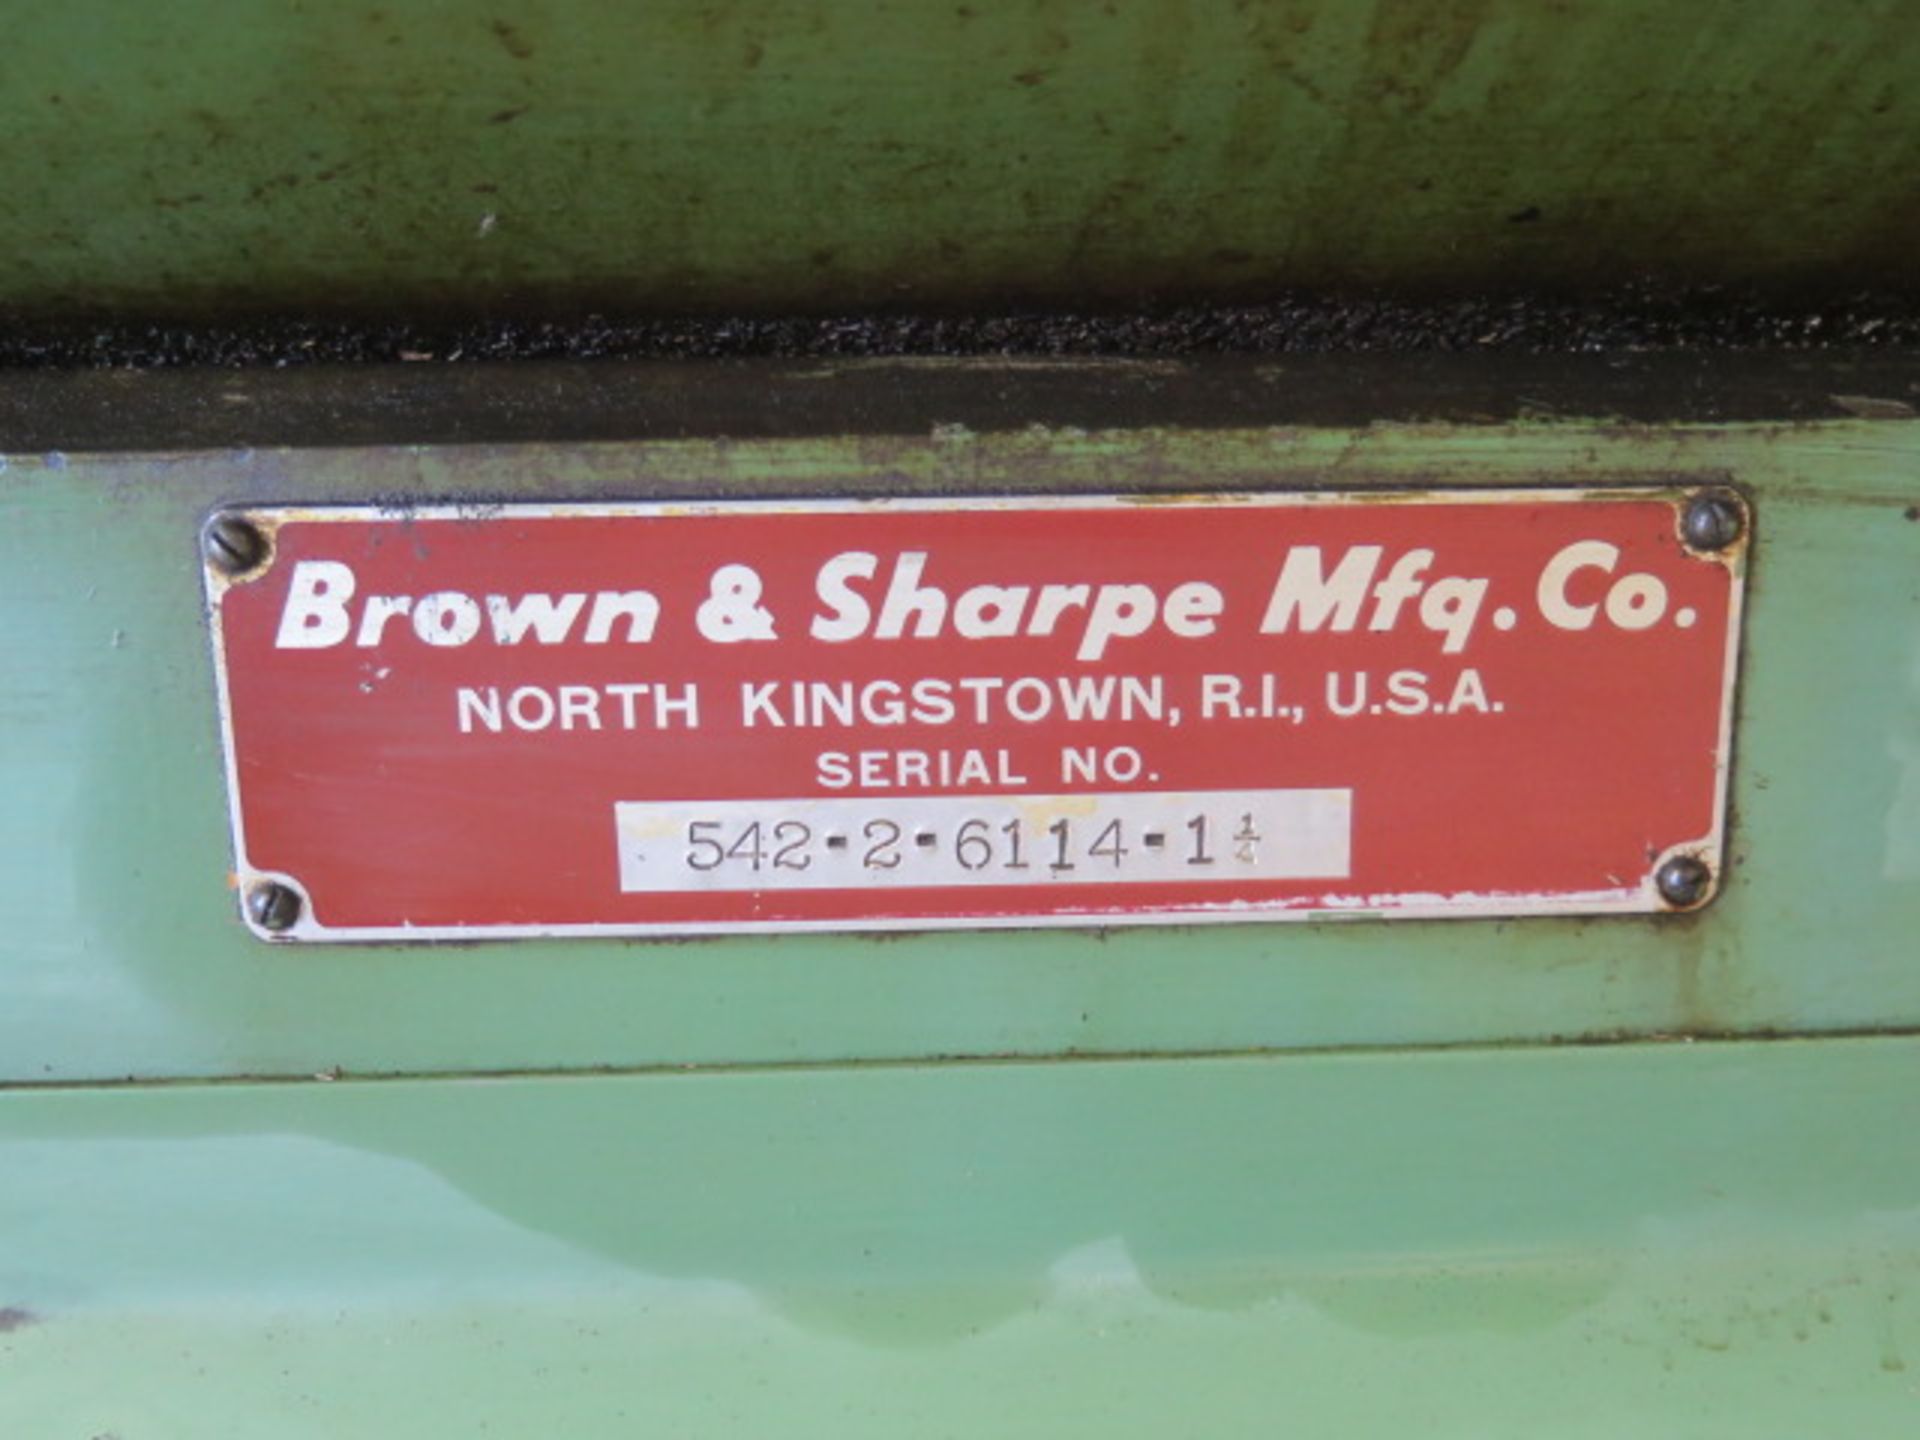 Brown & Sharpe No. 2G 1 ¼” Automatic Screw Machine s/n 542-2-6114-1 1/4 w/ Push SOLD AS IS - Image 13 of 13